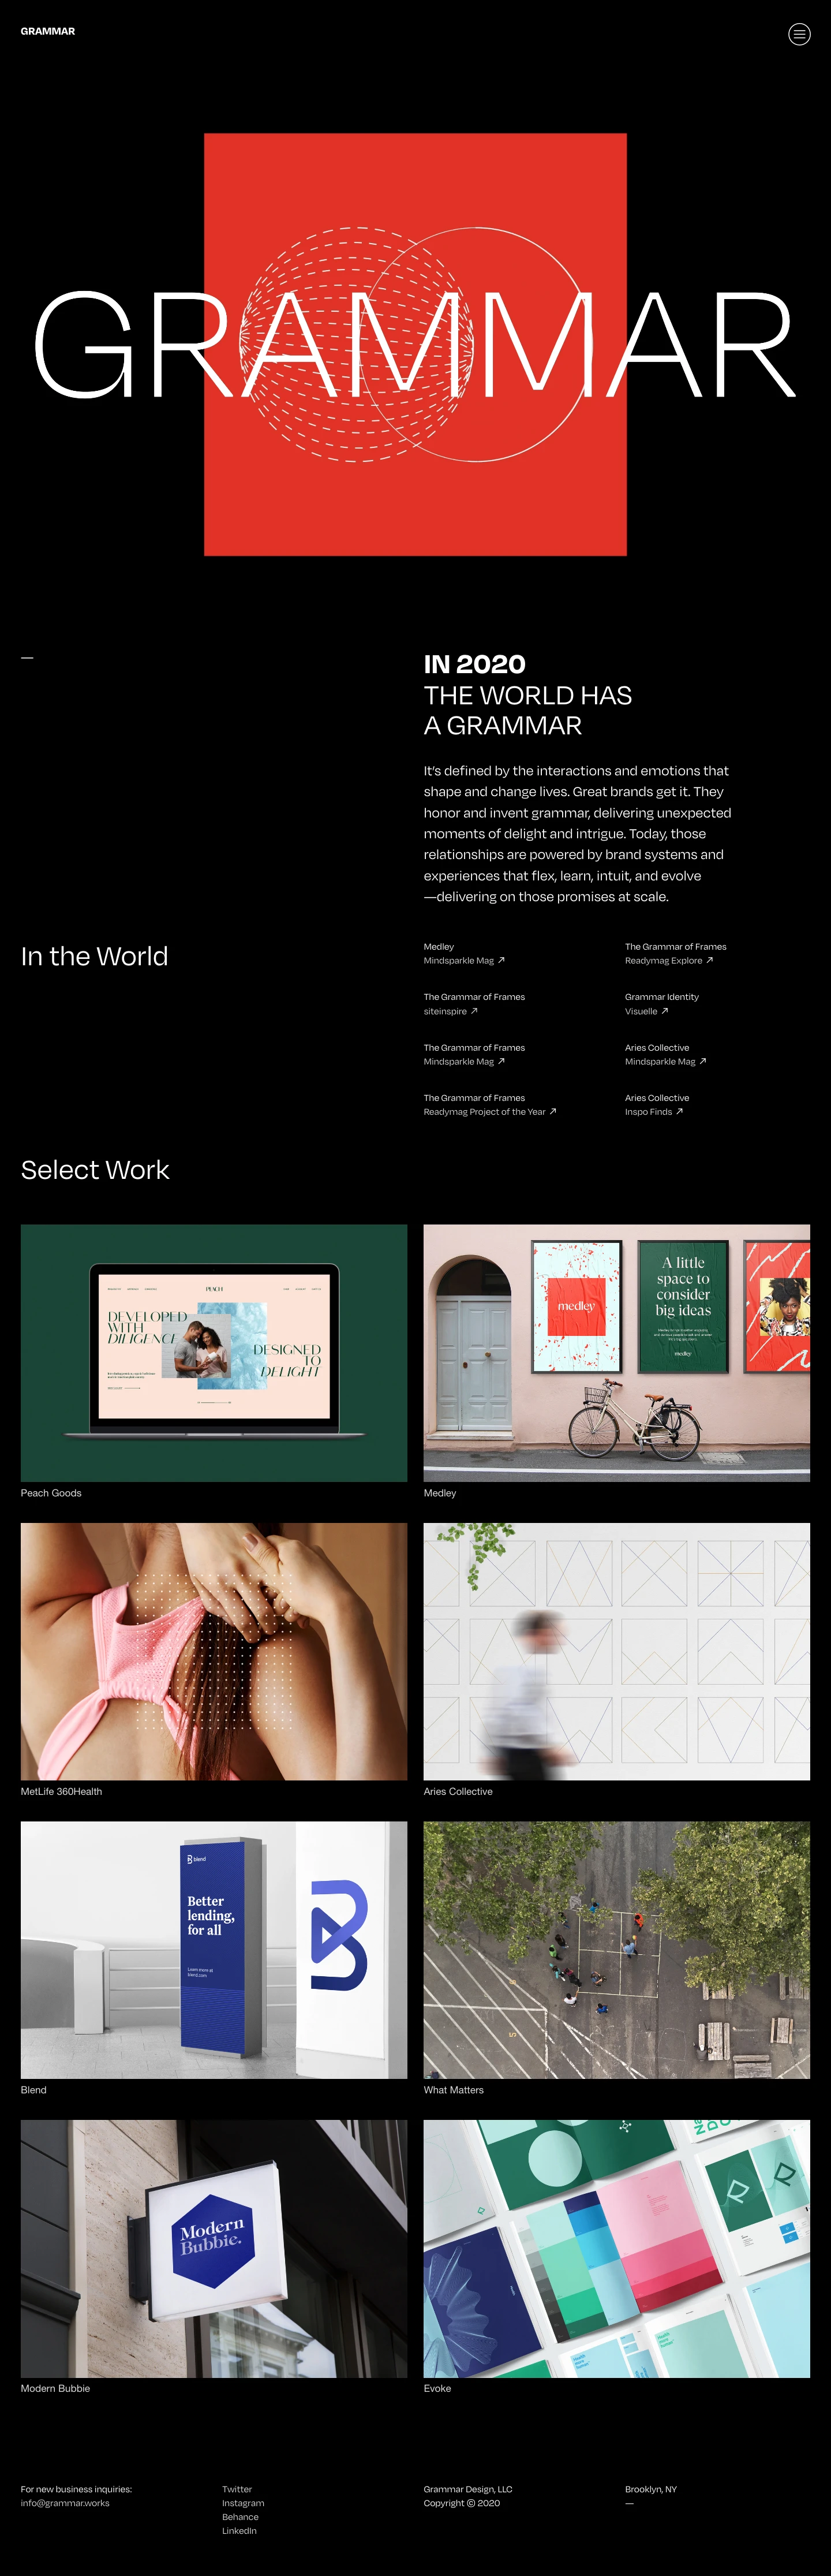 Grammar Landing Page Example: An independent design studio based in Brooklyn, NY